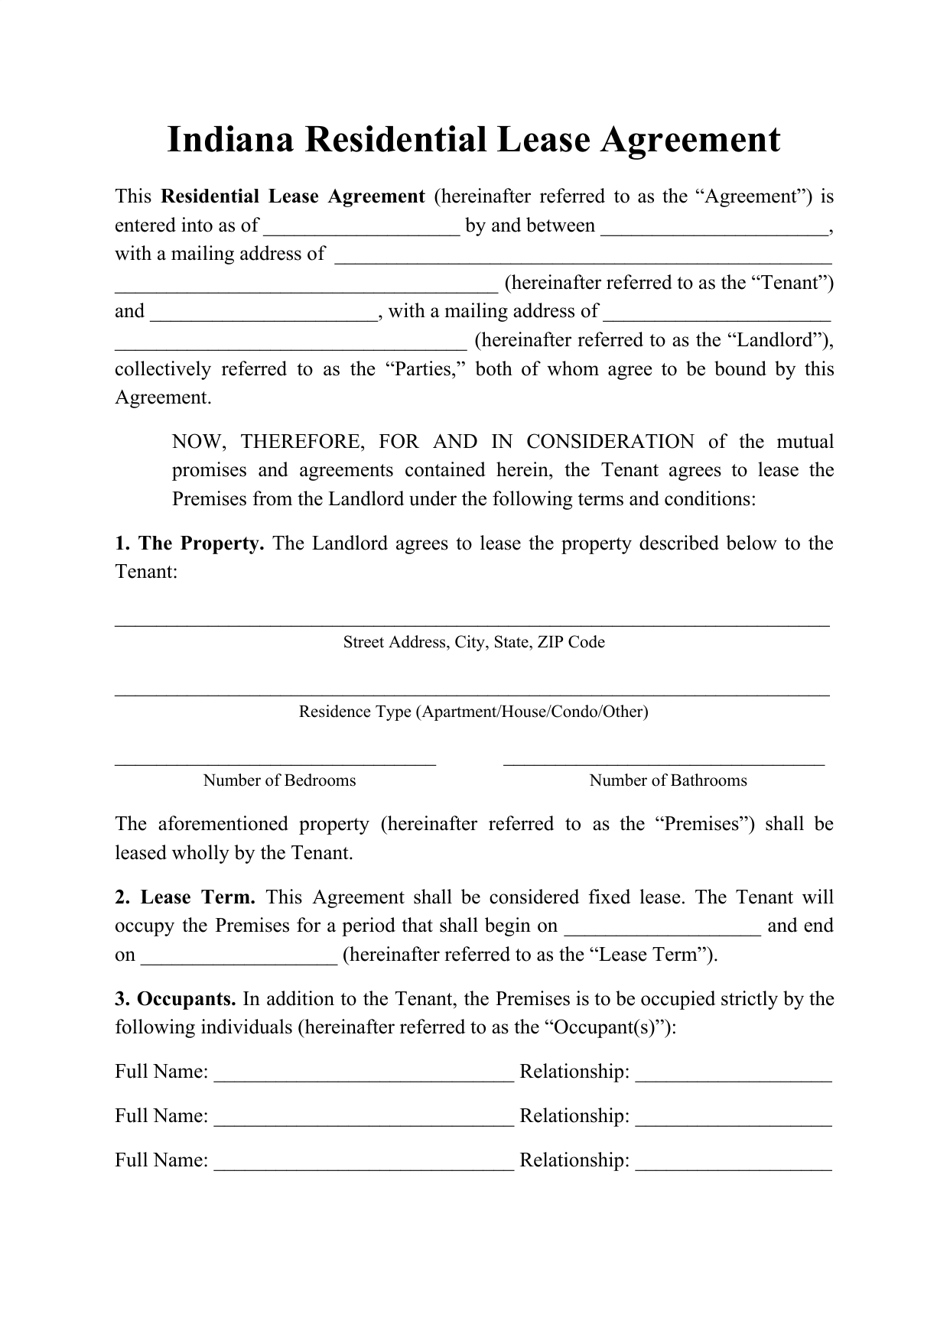 indiana residential lease agreement template download printable pdf